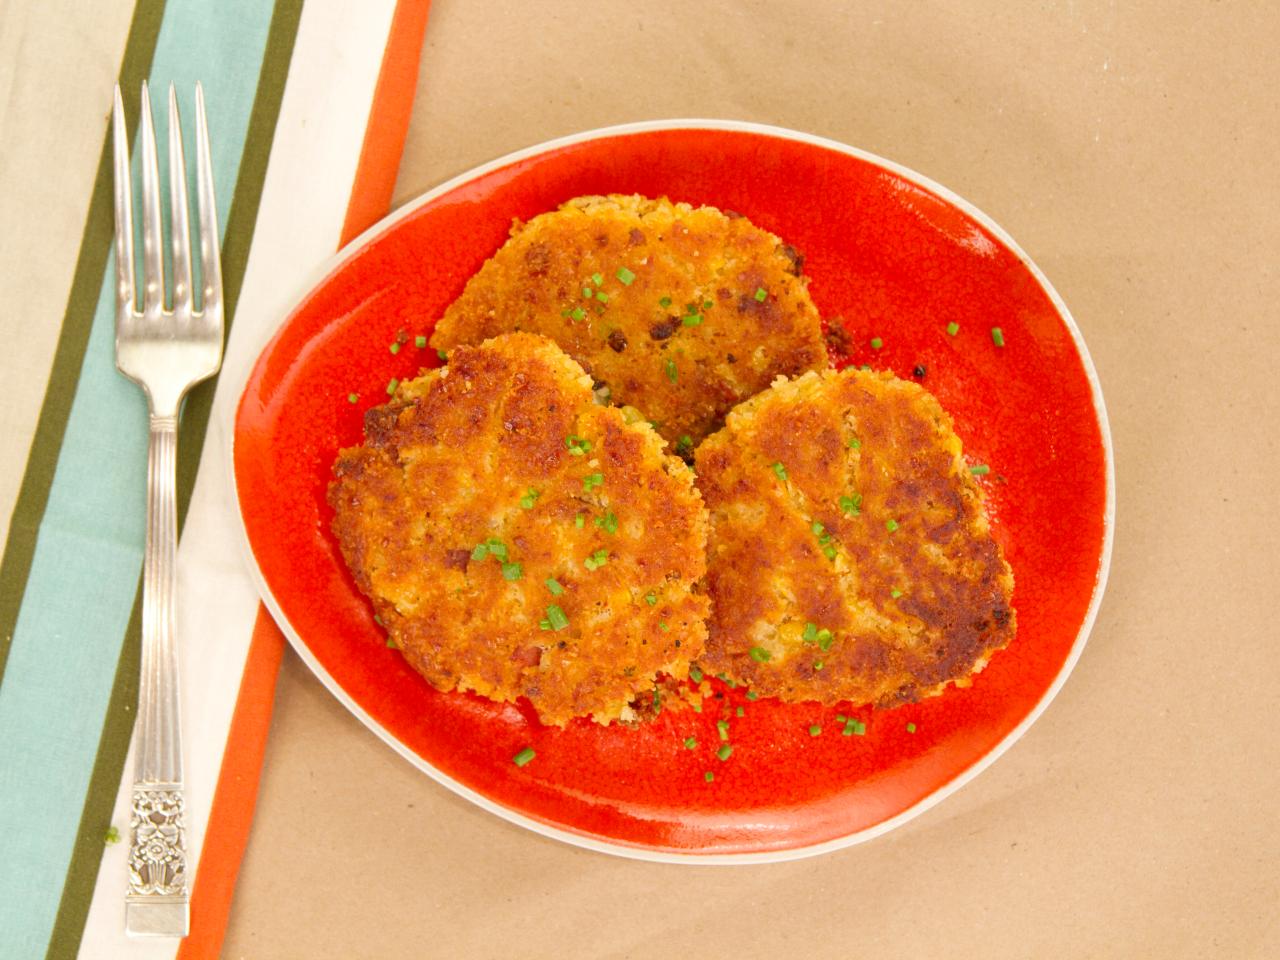 Chi chi's copycat mexican sweet corn cake Recipe by carrie - Cookpad